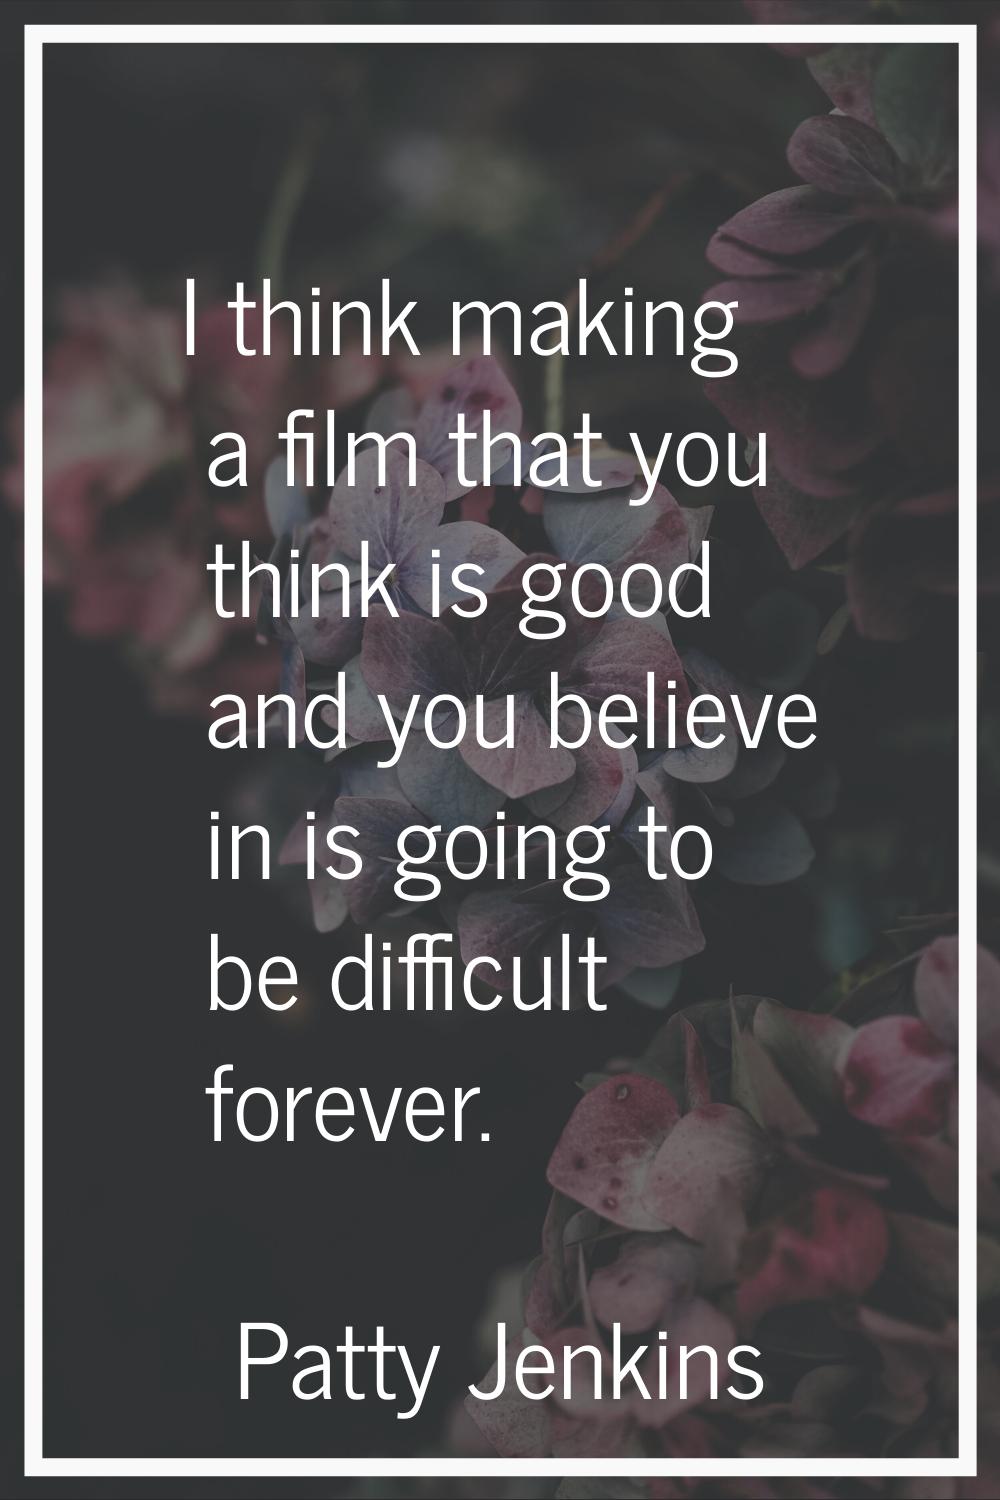 I think making a film that you think is good and you believe in is going to be difficult forever.